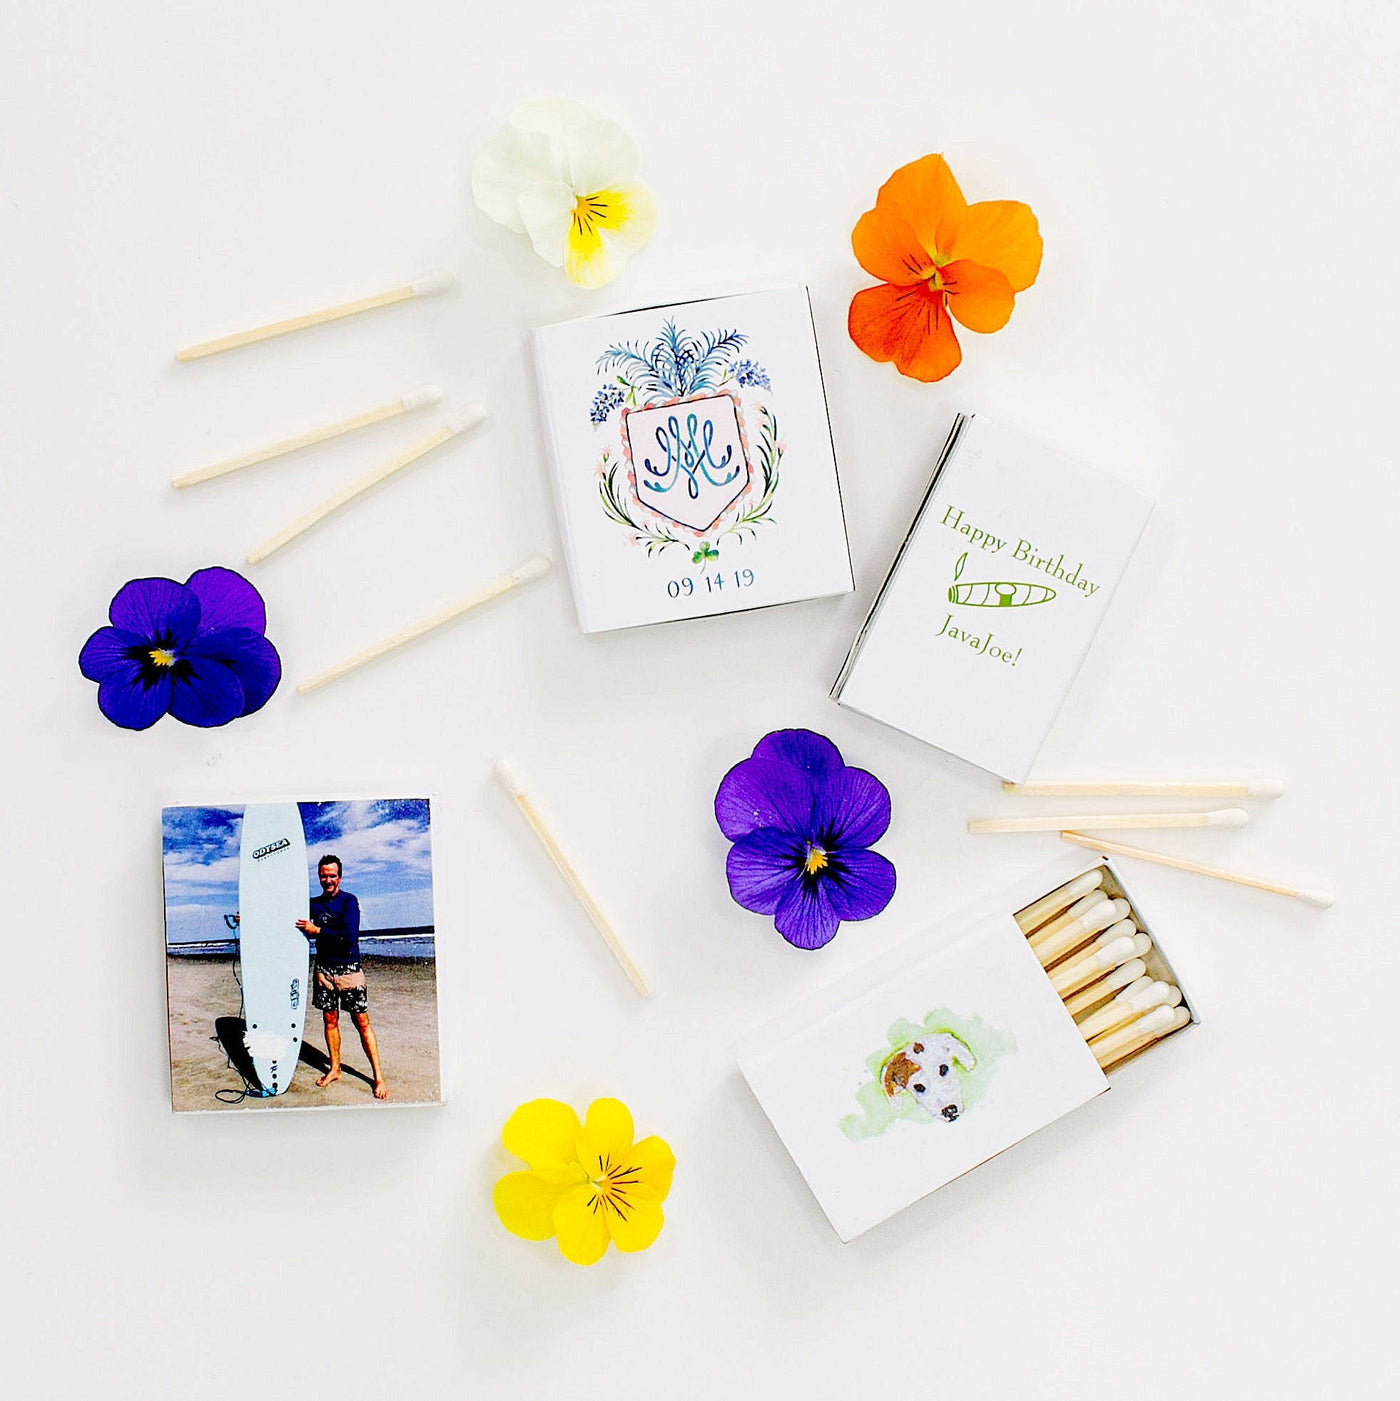 Wedding Crest Matchboxes, Custom Full Color Matches, Multi Color Watercolor Match Boxes, Monogram Matches